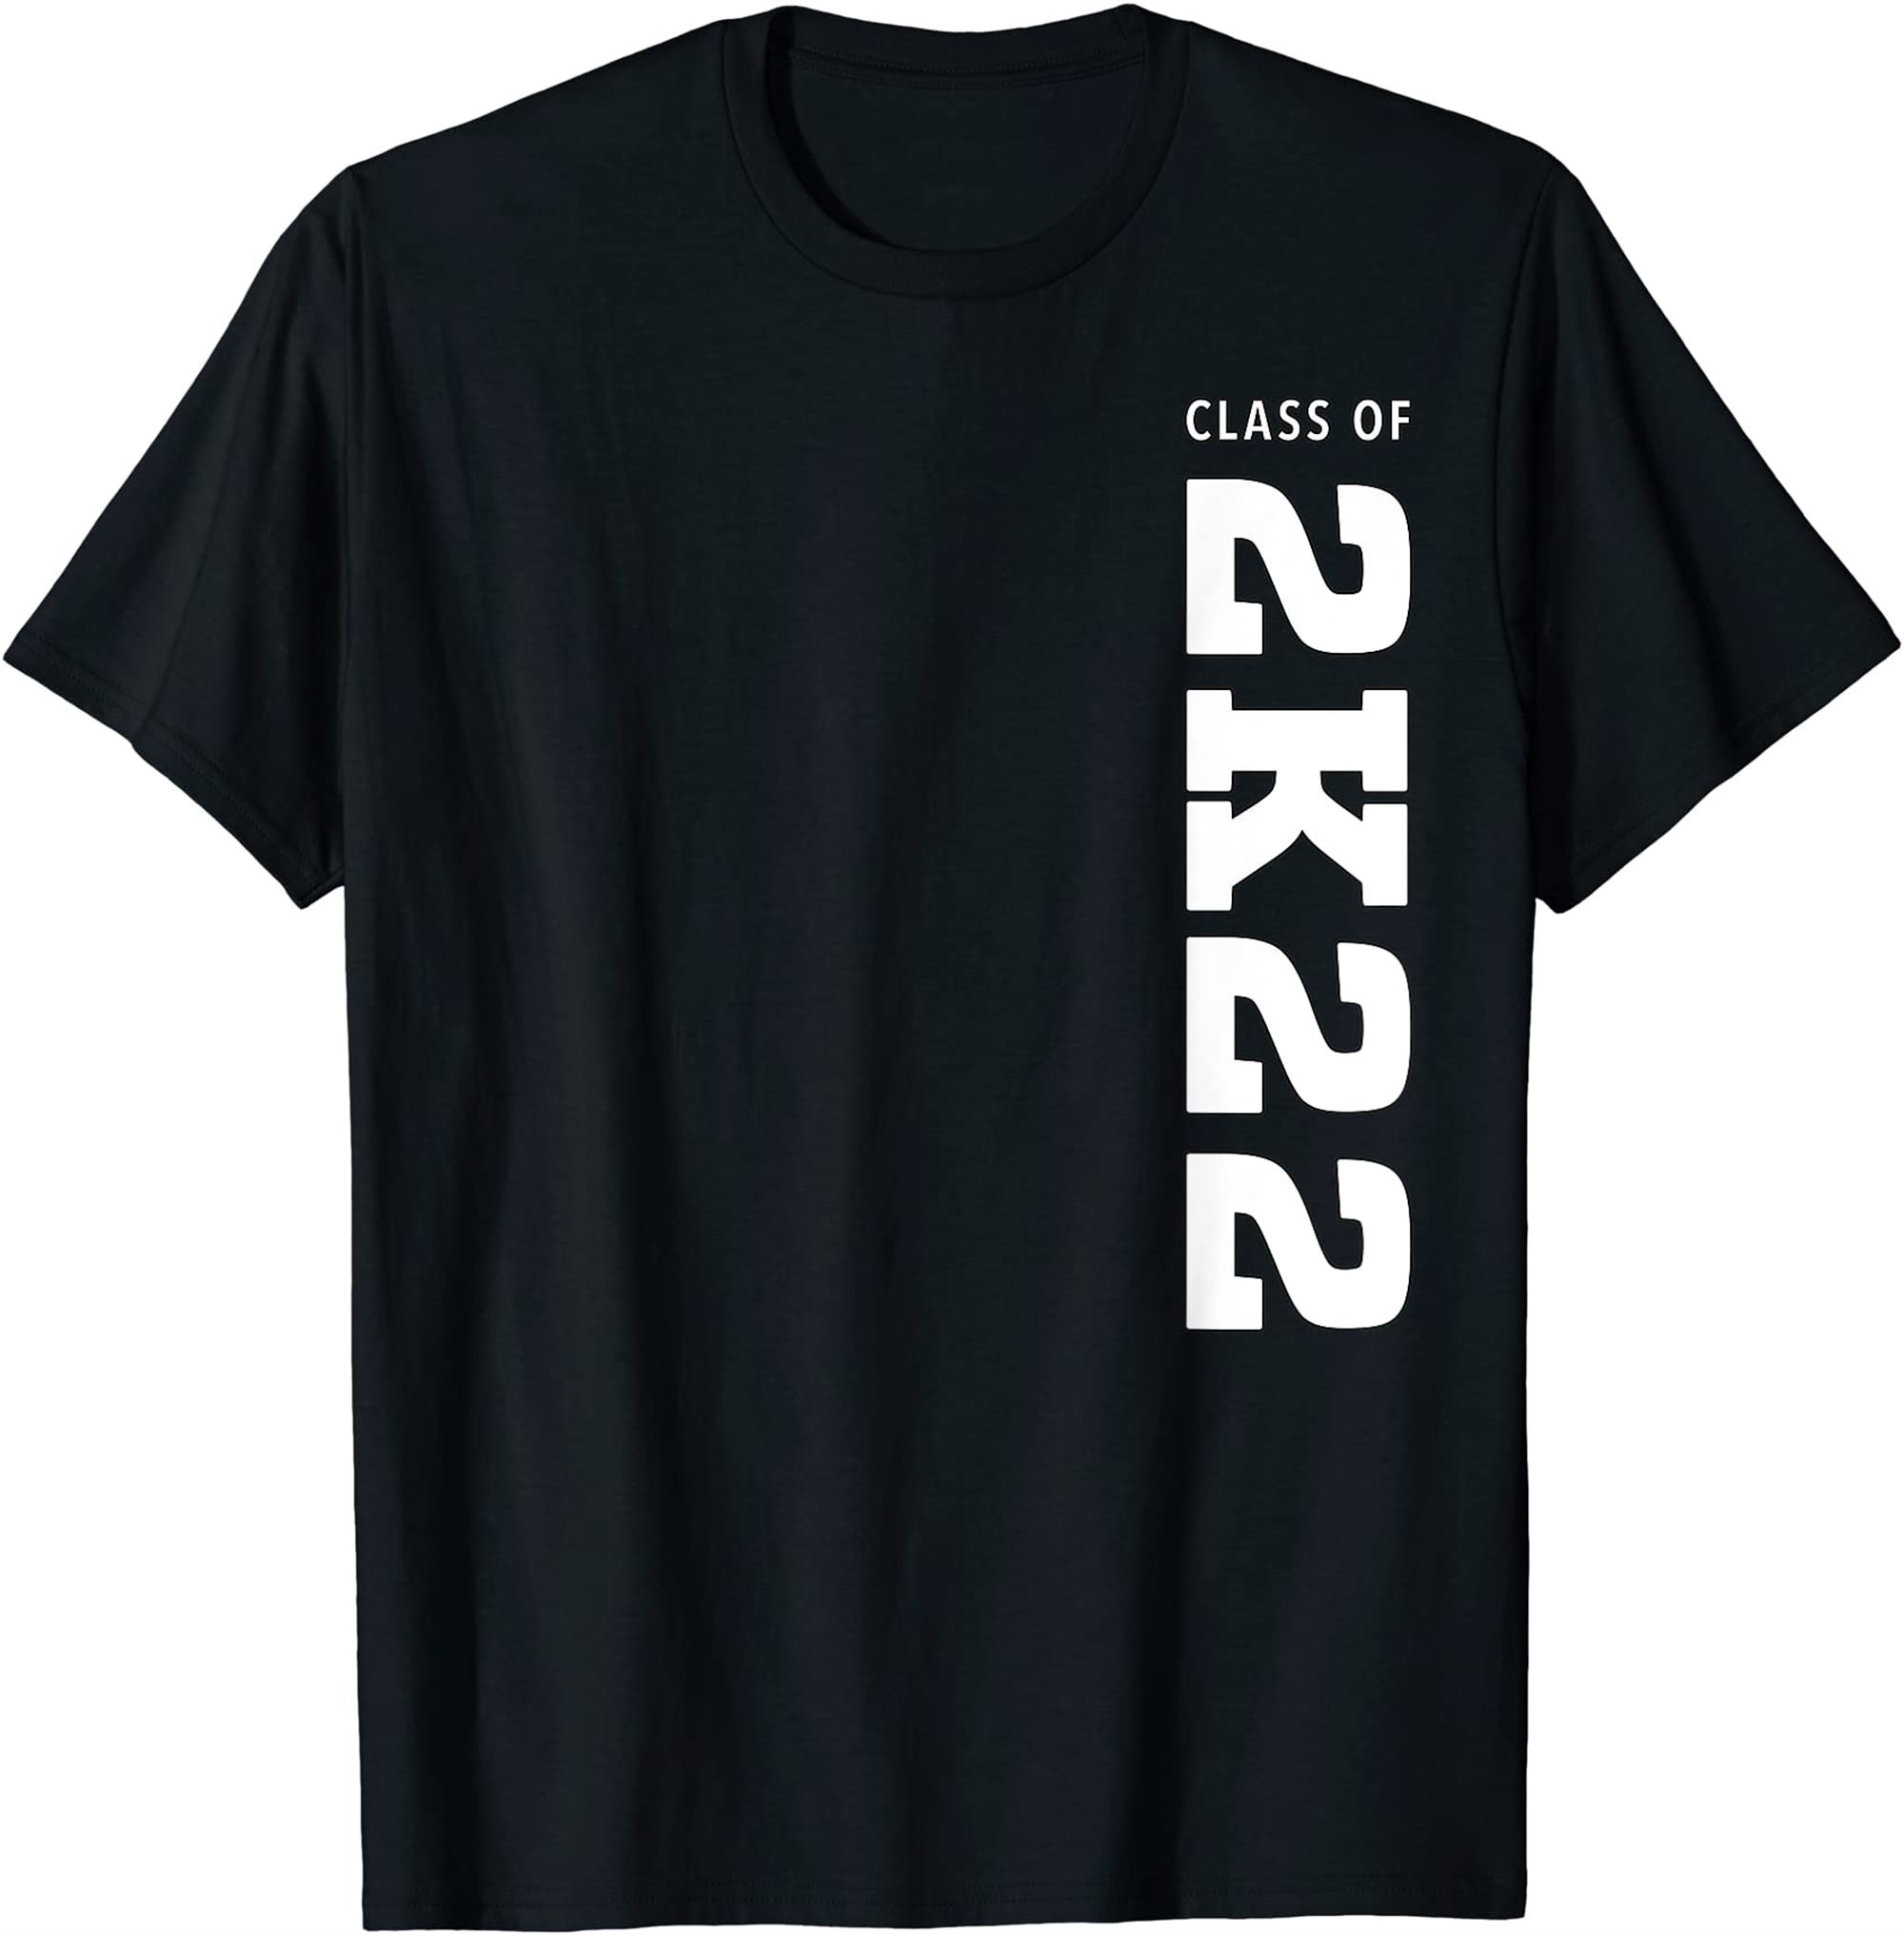 Class Of 2022 2k22 Graduation Or Matriculation T-shirt Plus Size Up To 5xl